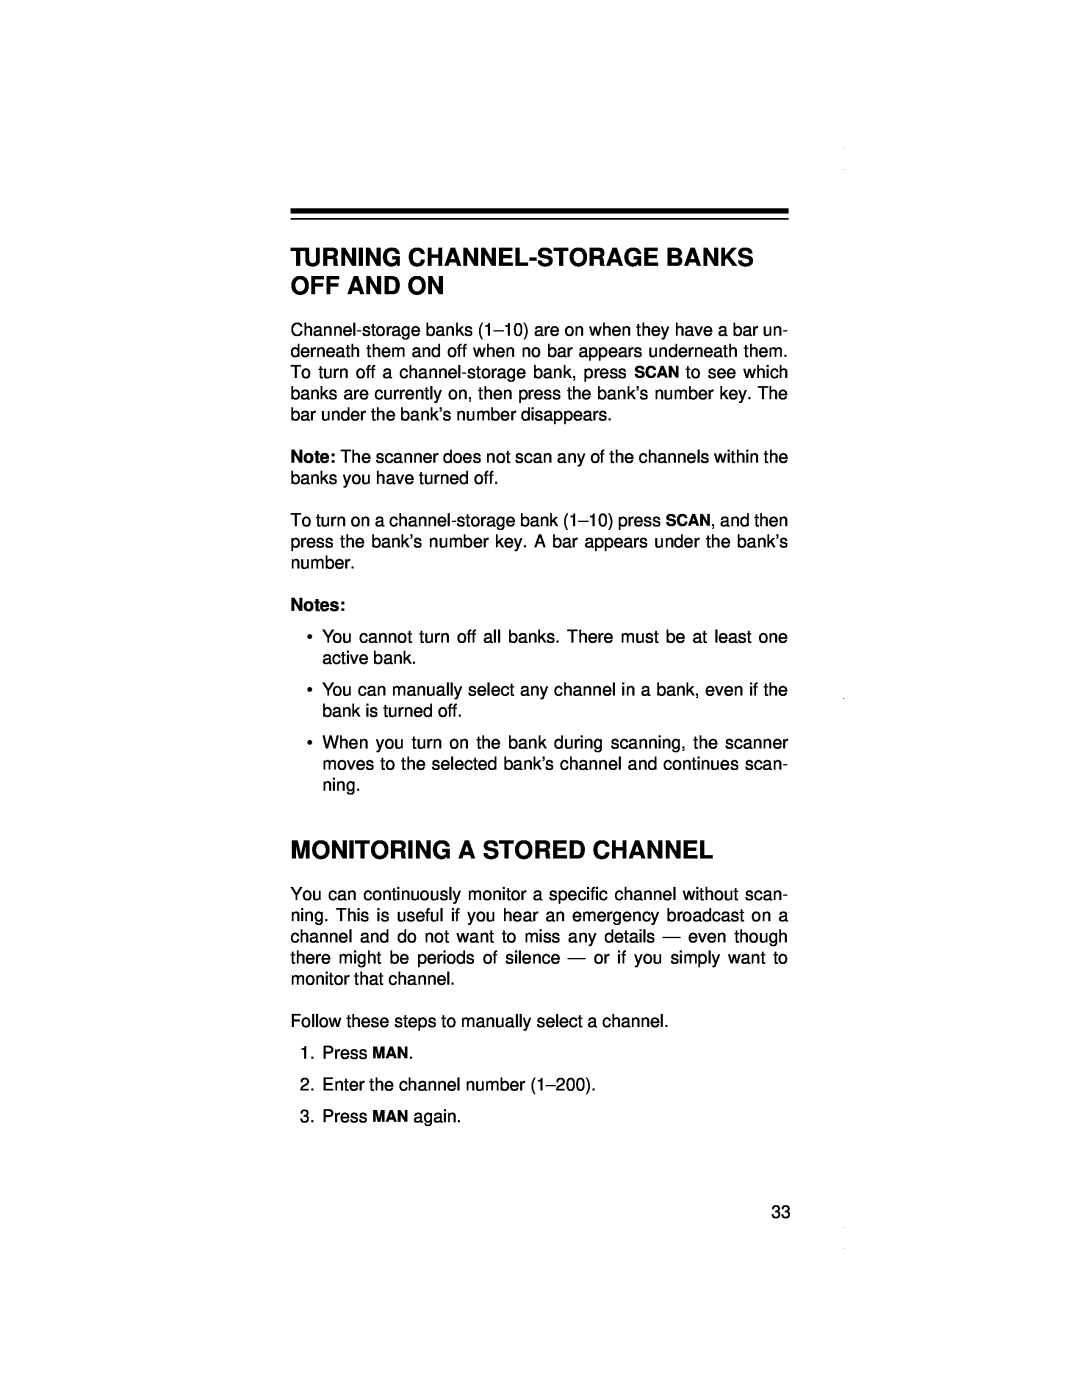 Radio Shack PRO-79 owner manual Turning Channel-Storage Banks Off And On, Monitoring A Stored Channel 